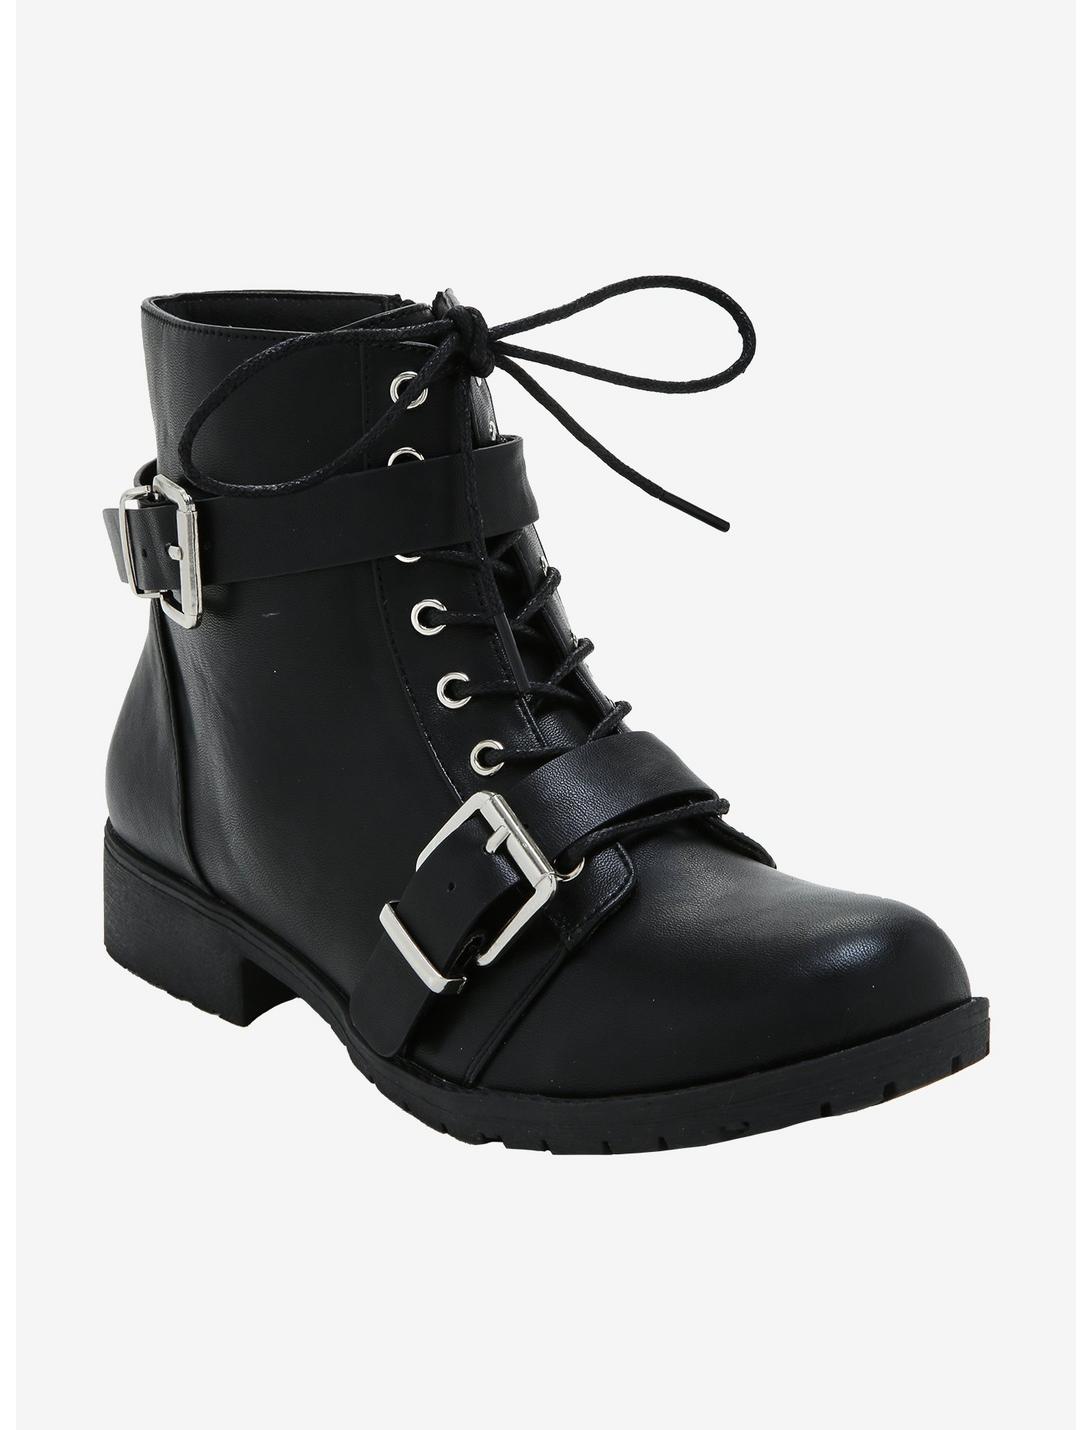 Mad House Buckle Boots, BLACK, hi-res